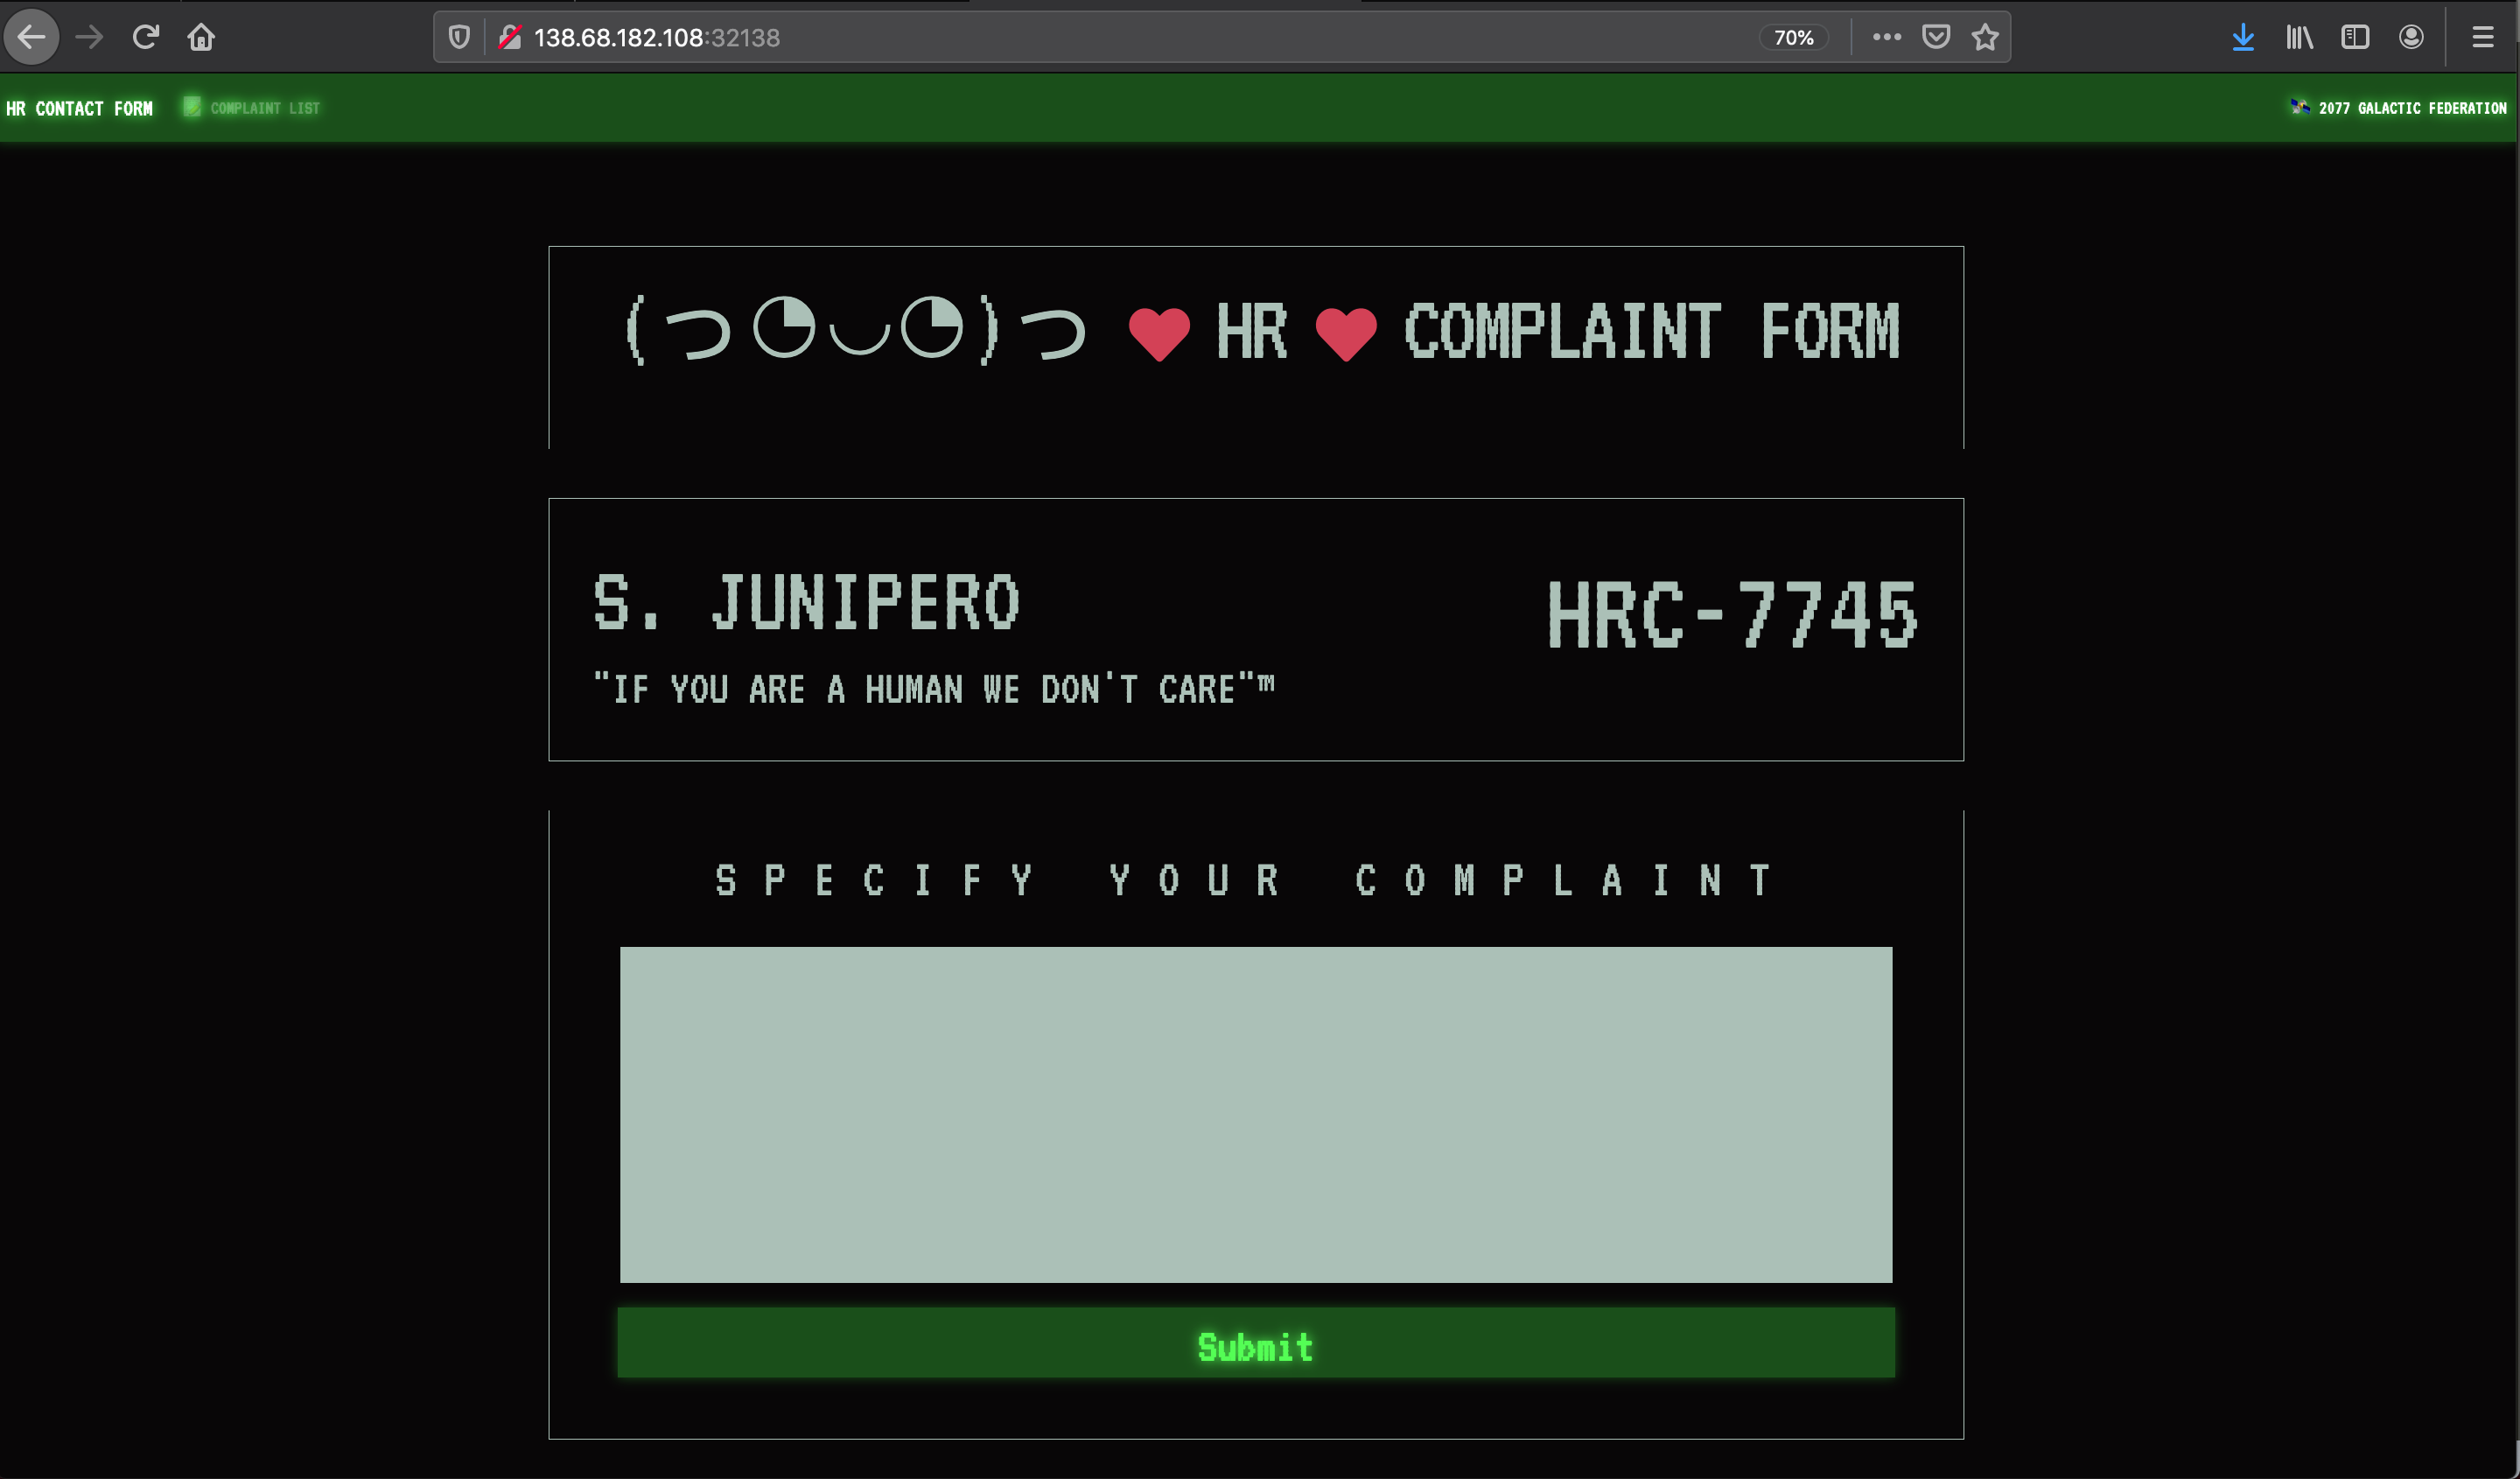 https://manhnv.com/images/posts/ctf/Cyber-Apocalypse-2021/Alien-complaint-form/Screen_Shot_2021-04-24_at_23.27.37.png